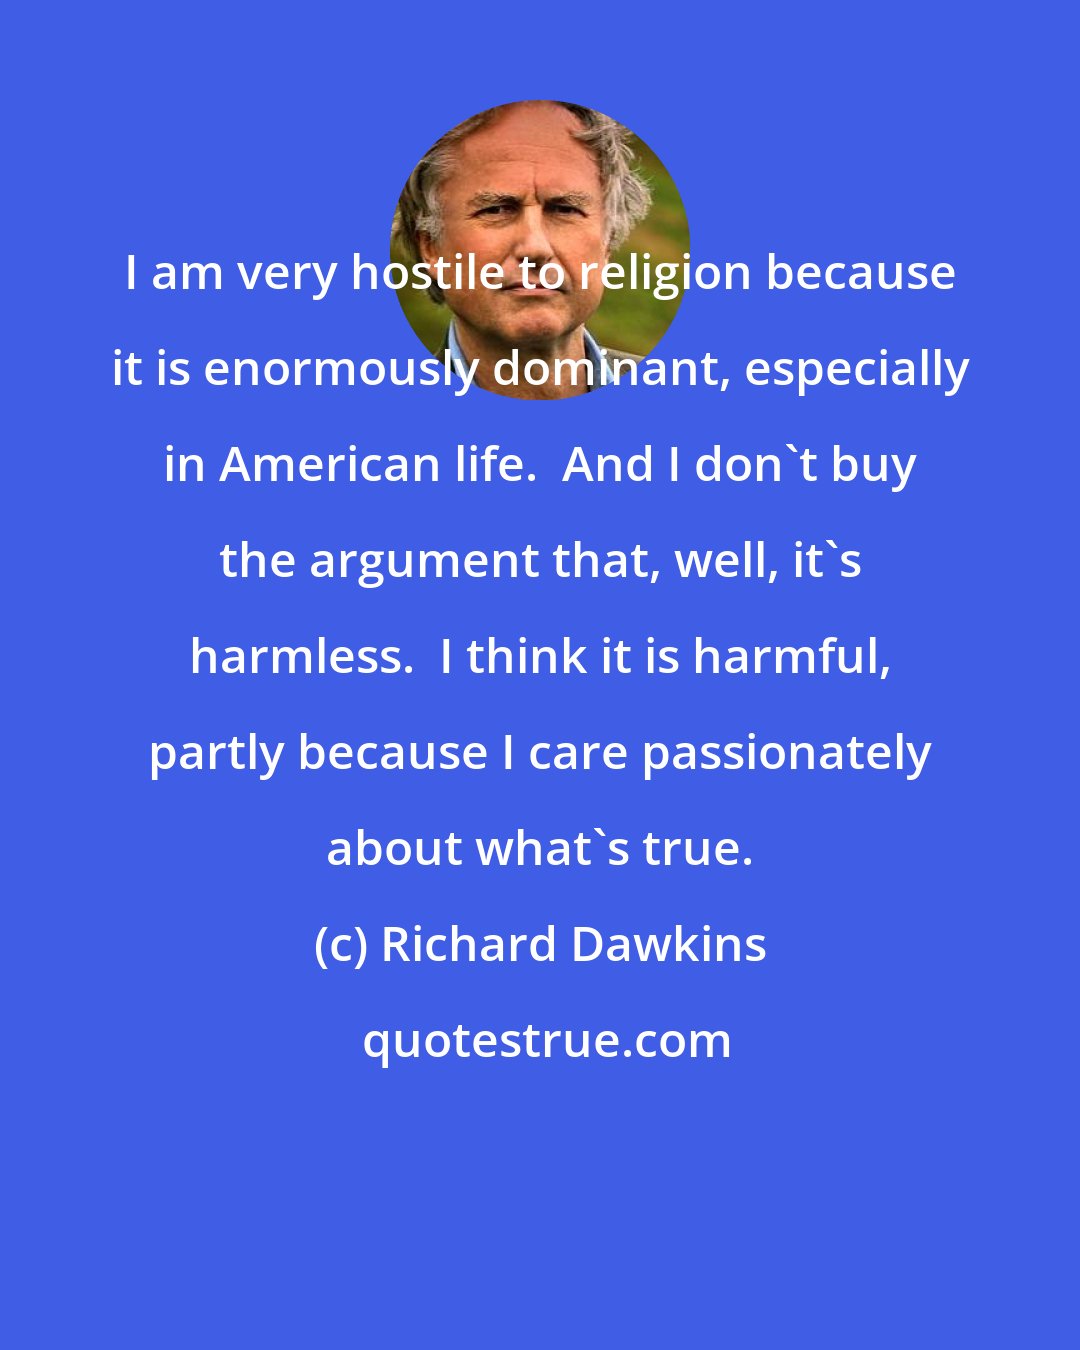 Richard Dawkins: I am very hostile to religion because it is enormously dominant, especially in American life.  And I don't buy the argument that, well, it's harmless.  I think it is harmful, partly because I care passionately about what's true.